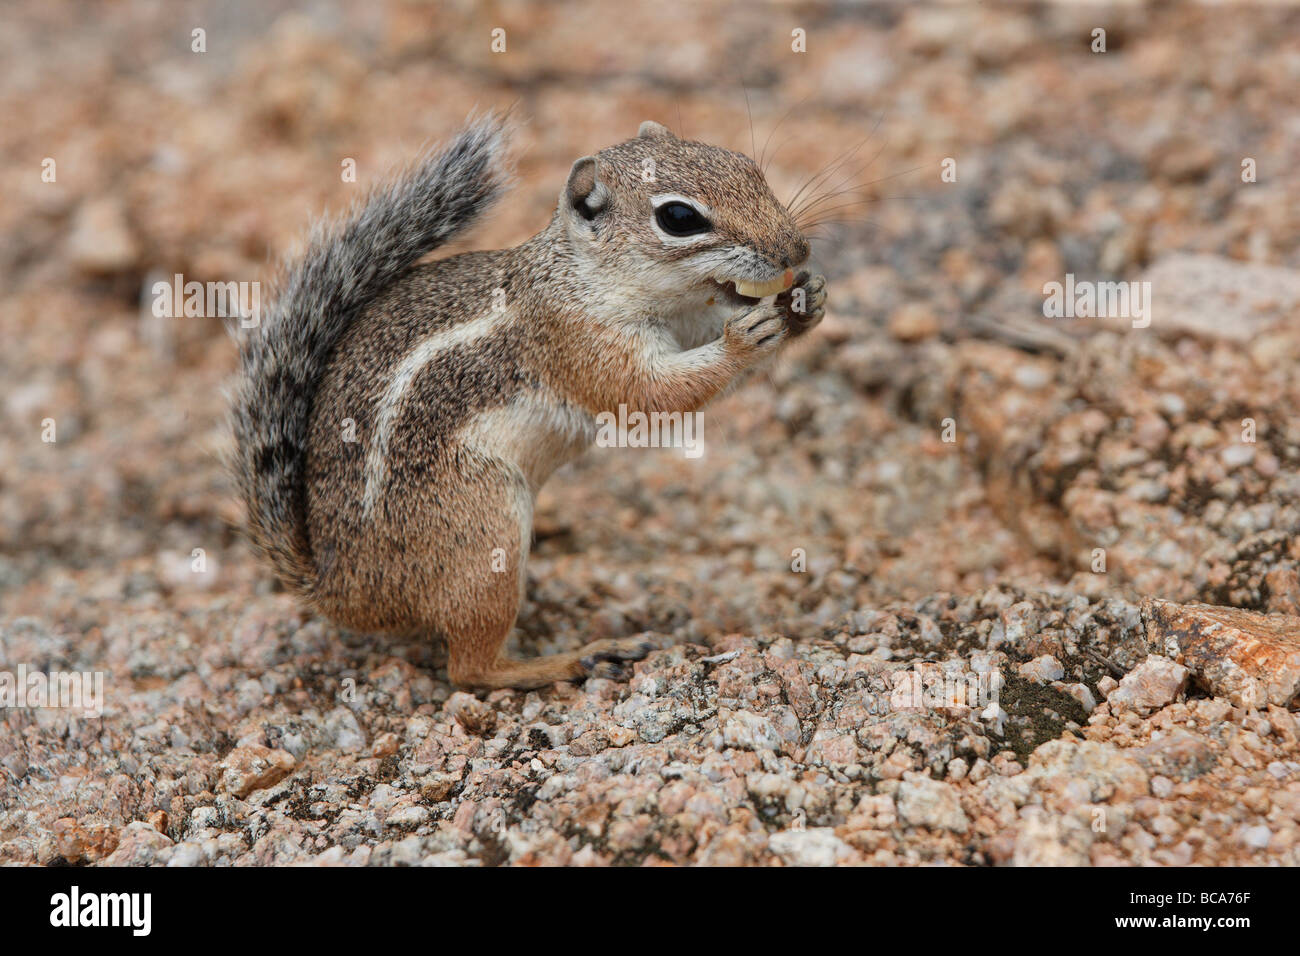 An antelope ground squirrel poses for a picture. Stock Photo